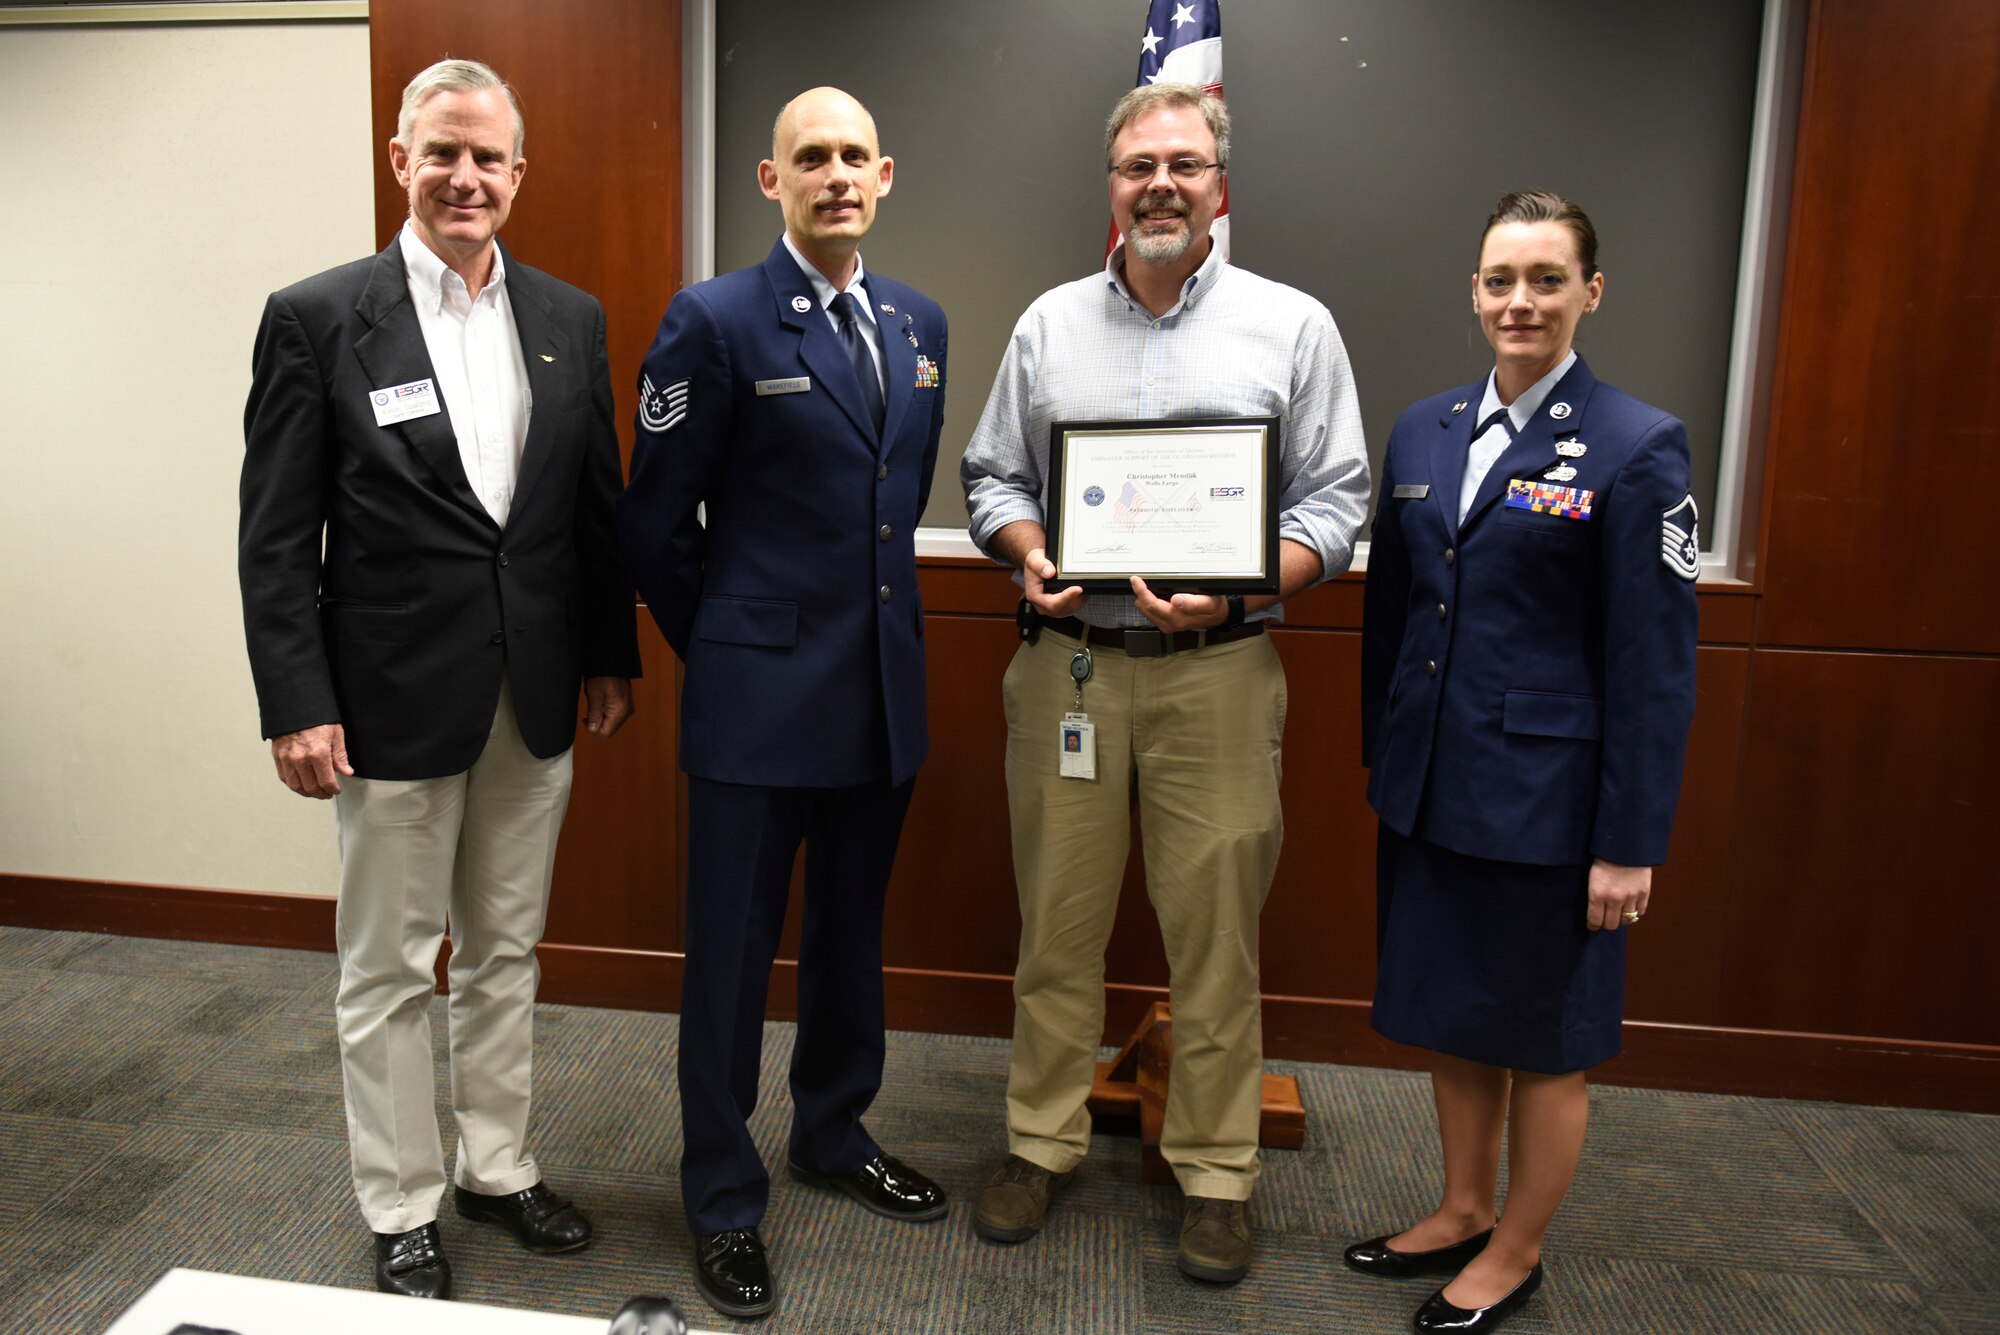 From left to right Mr. Kevin Spalding Area Chair with the North Carolina ESGR, U.S. Air Force Tech. Sgt. Stacey Wakefield of the 156th Aeromedical Evacuation Squadron, Mr. Chris Mendlik Wells Fargo Information Security Manager, and Master Sgt. Sara Evans with the 131st Bomb Wing pose for a photo after presenting Mr. Mendlik the ESGR Patriotic Employer Award at the Wells Fargo Charlotte Customer Information Center, NC, June 14, 2019. The Patriotic Employer Award is the first level that an employer can be nominated for, and reflects the efforts made to support citizen warriors through a wide-range of measures including flexible schedules, time off prior to and after deployment, caring for families, and granting leaves of absence if needed.